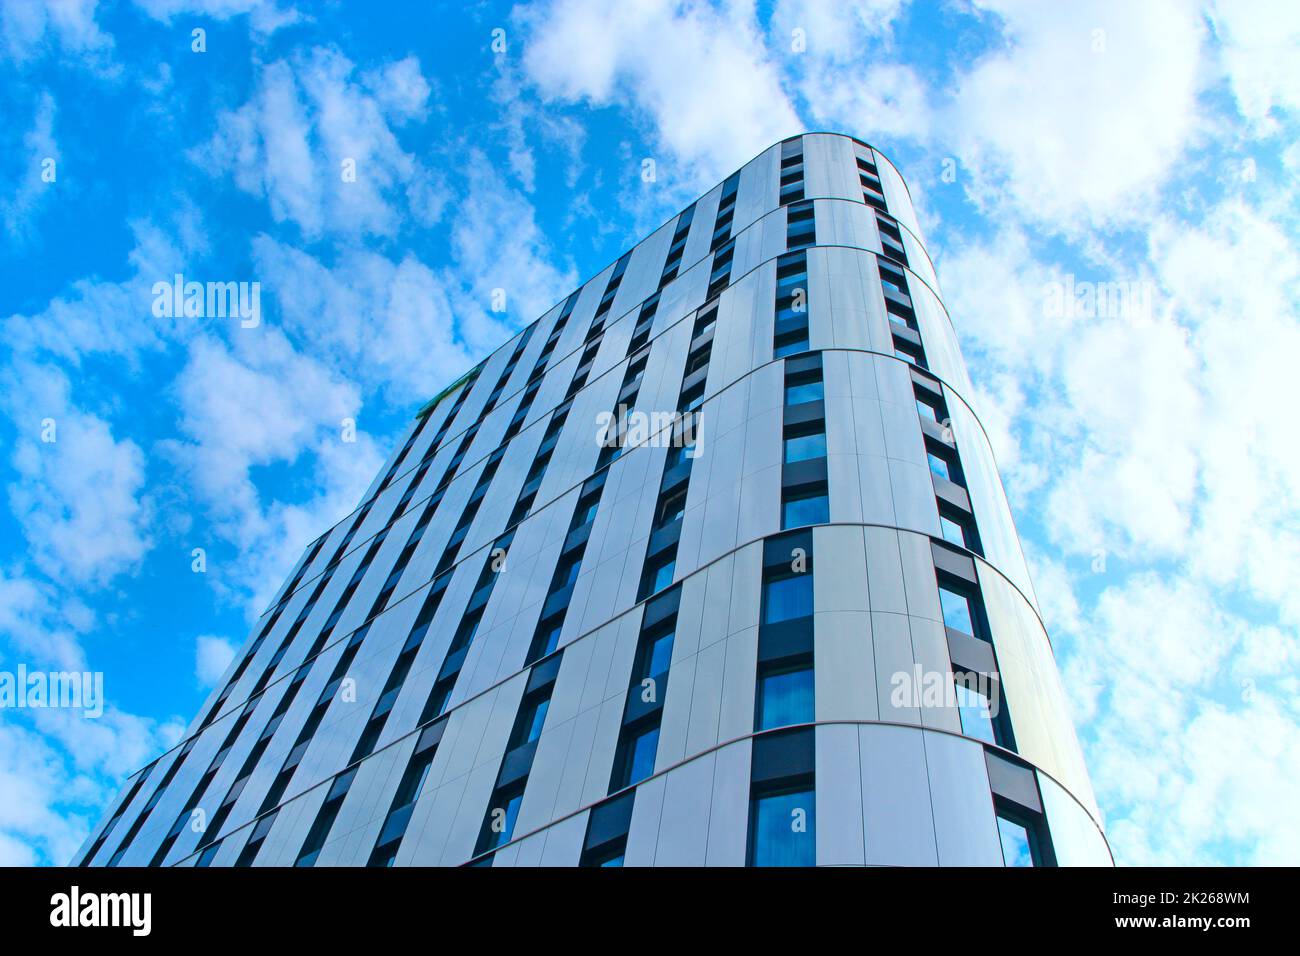 High glass skyscraper in Warsaw. Modern architecture of city buildings Stock Photo